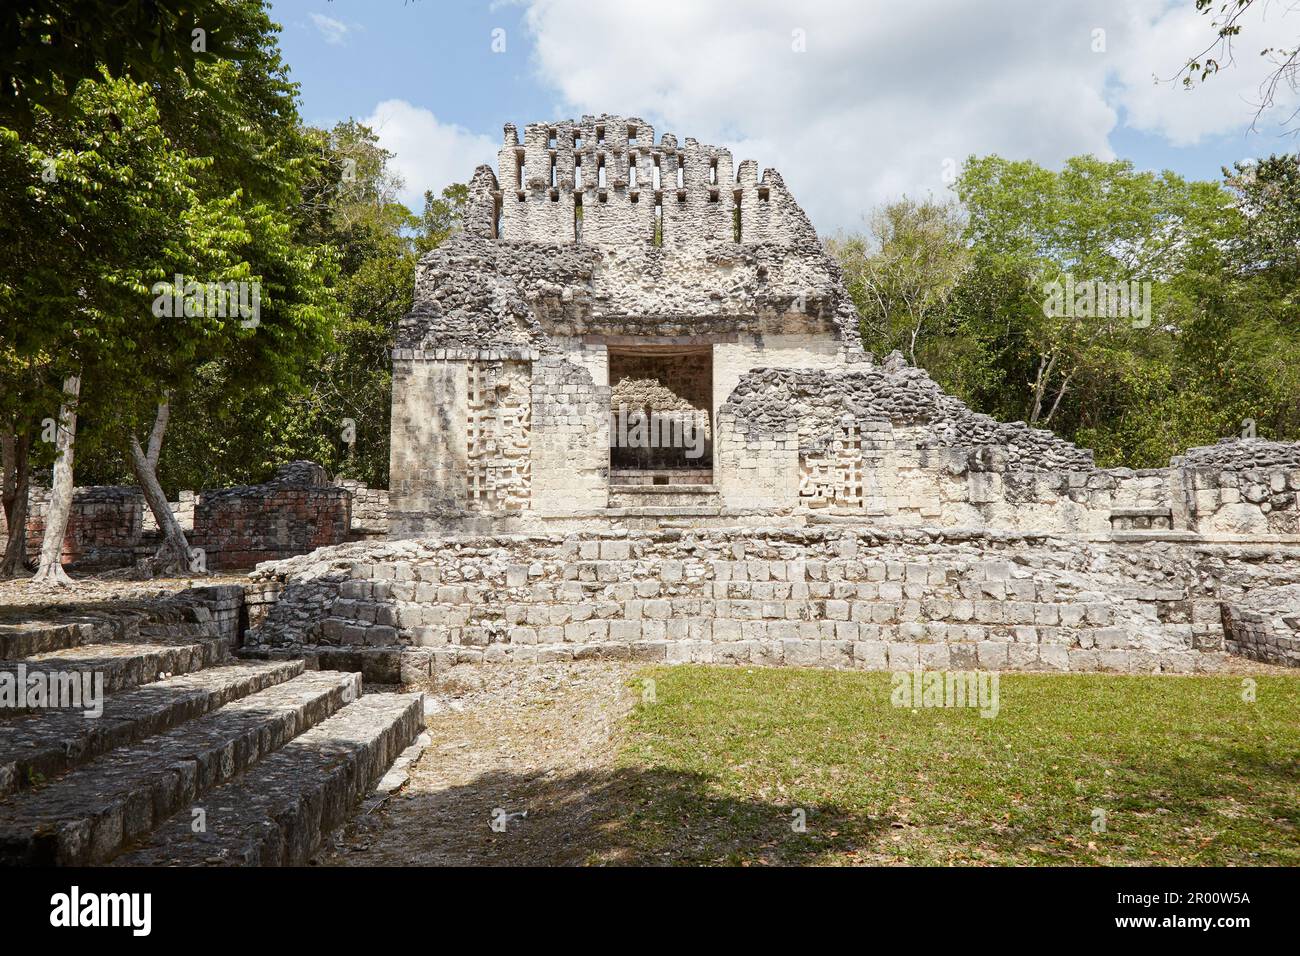 The Mayan Ruins of Chicanna in Campeche, Mexico, Best Known for its Huge Earth Monster Building Stock Photo